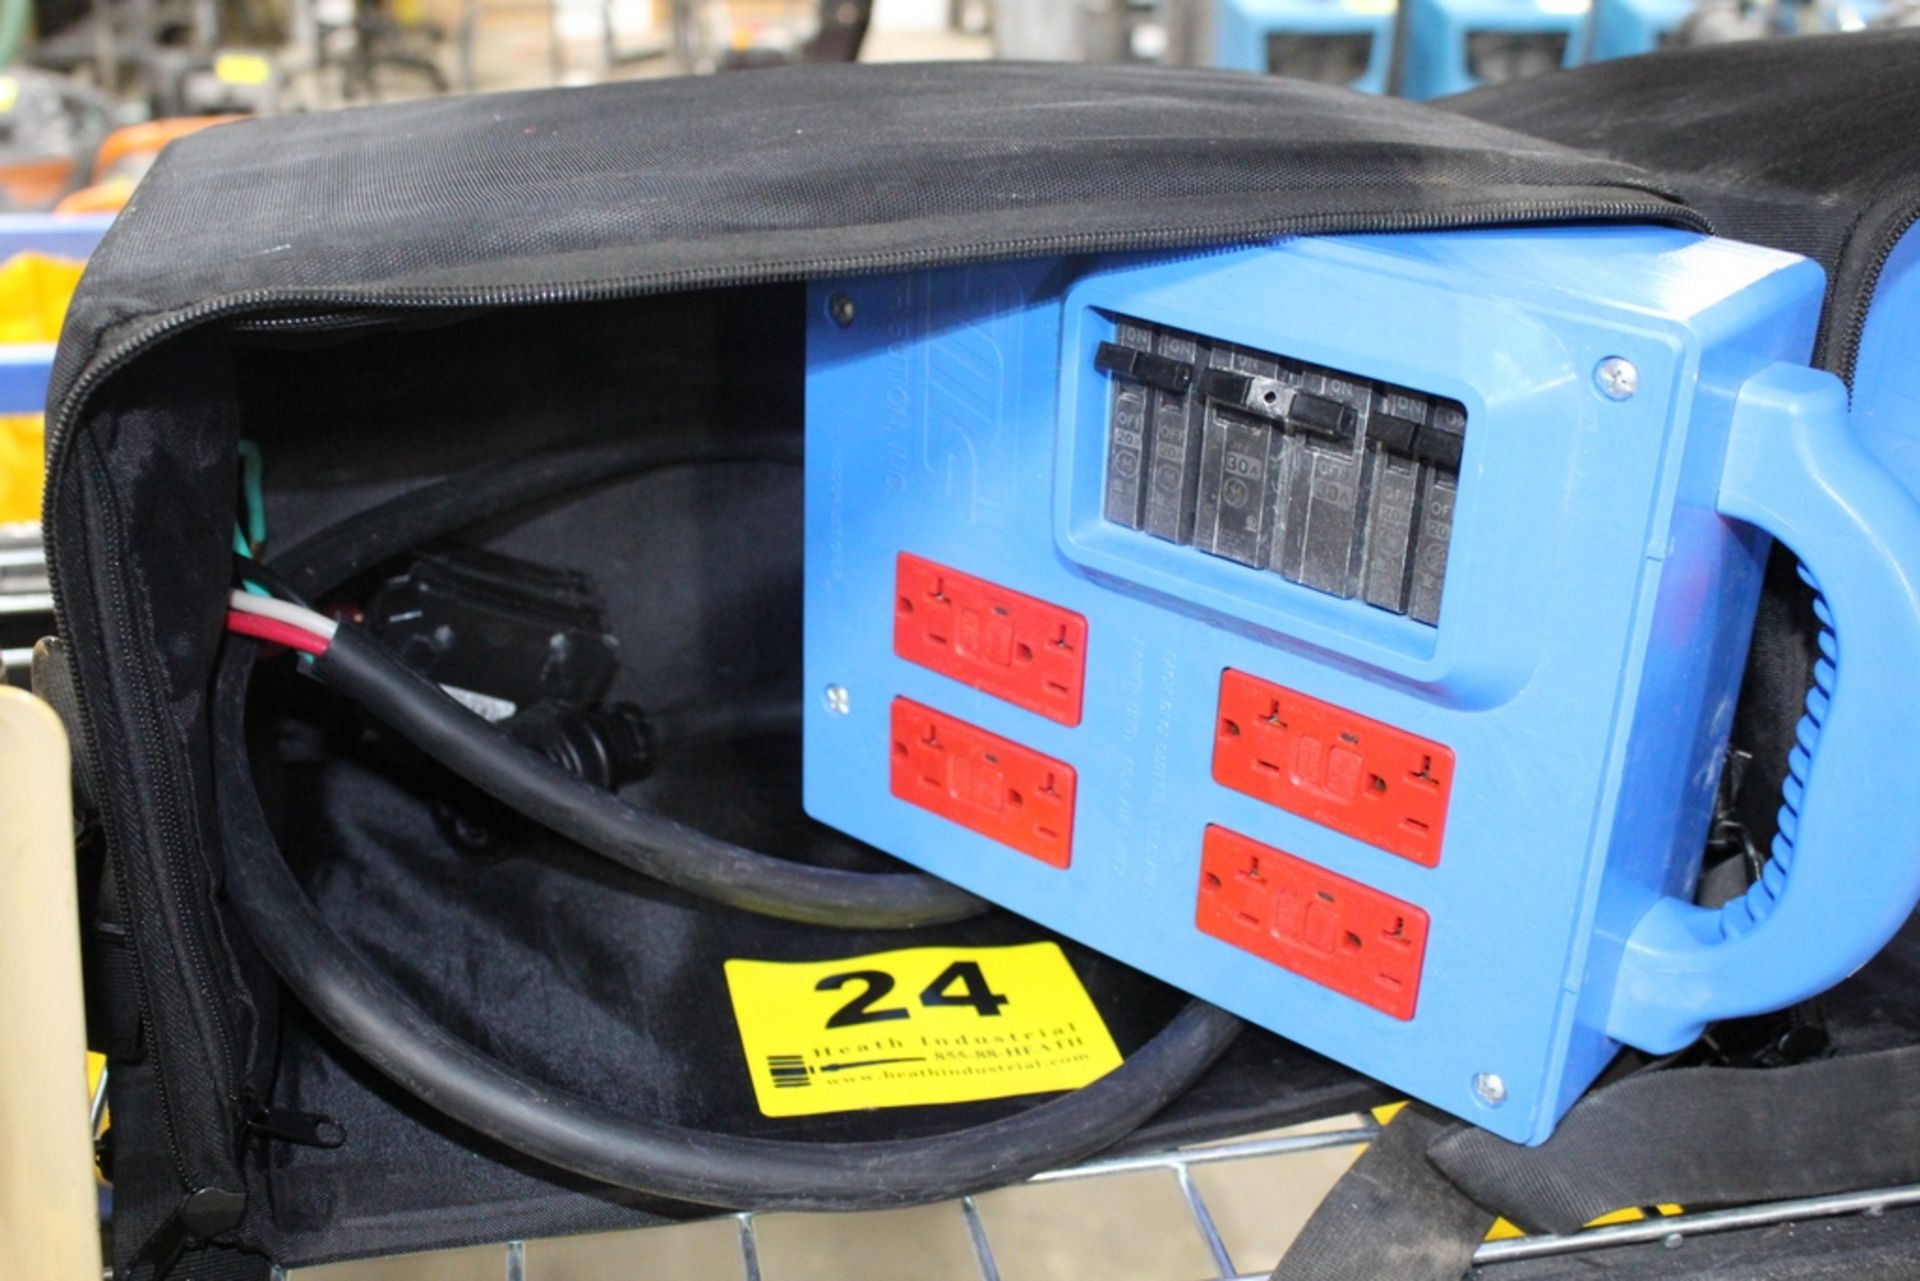 GMS MODEL GMS1430-PDC PORTABLE POWER DISTRIBUTION CENTER / WITH BAG